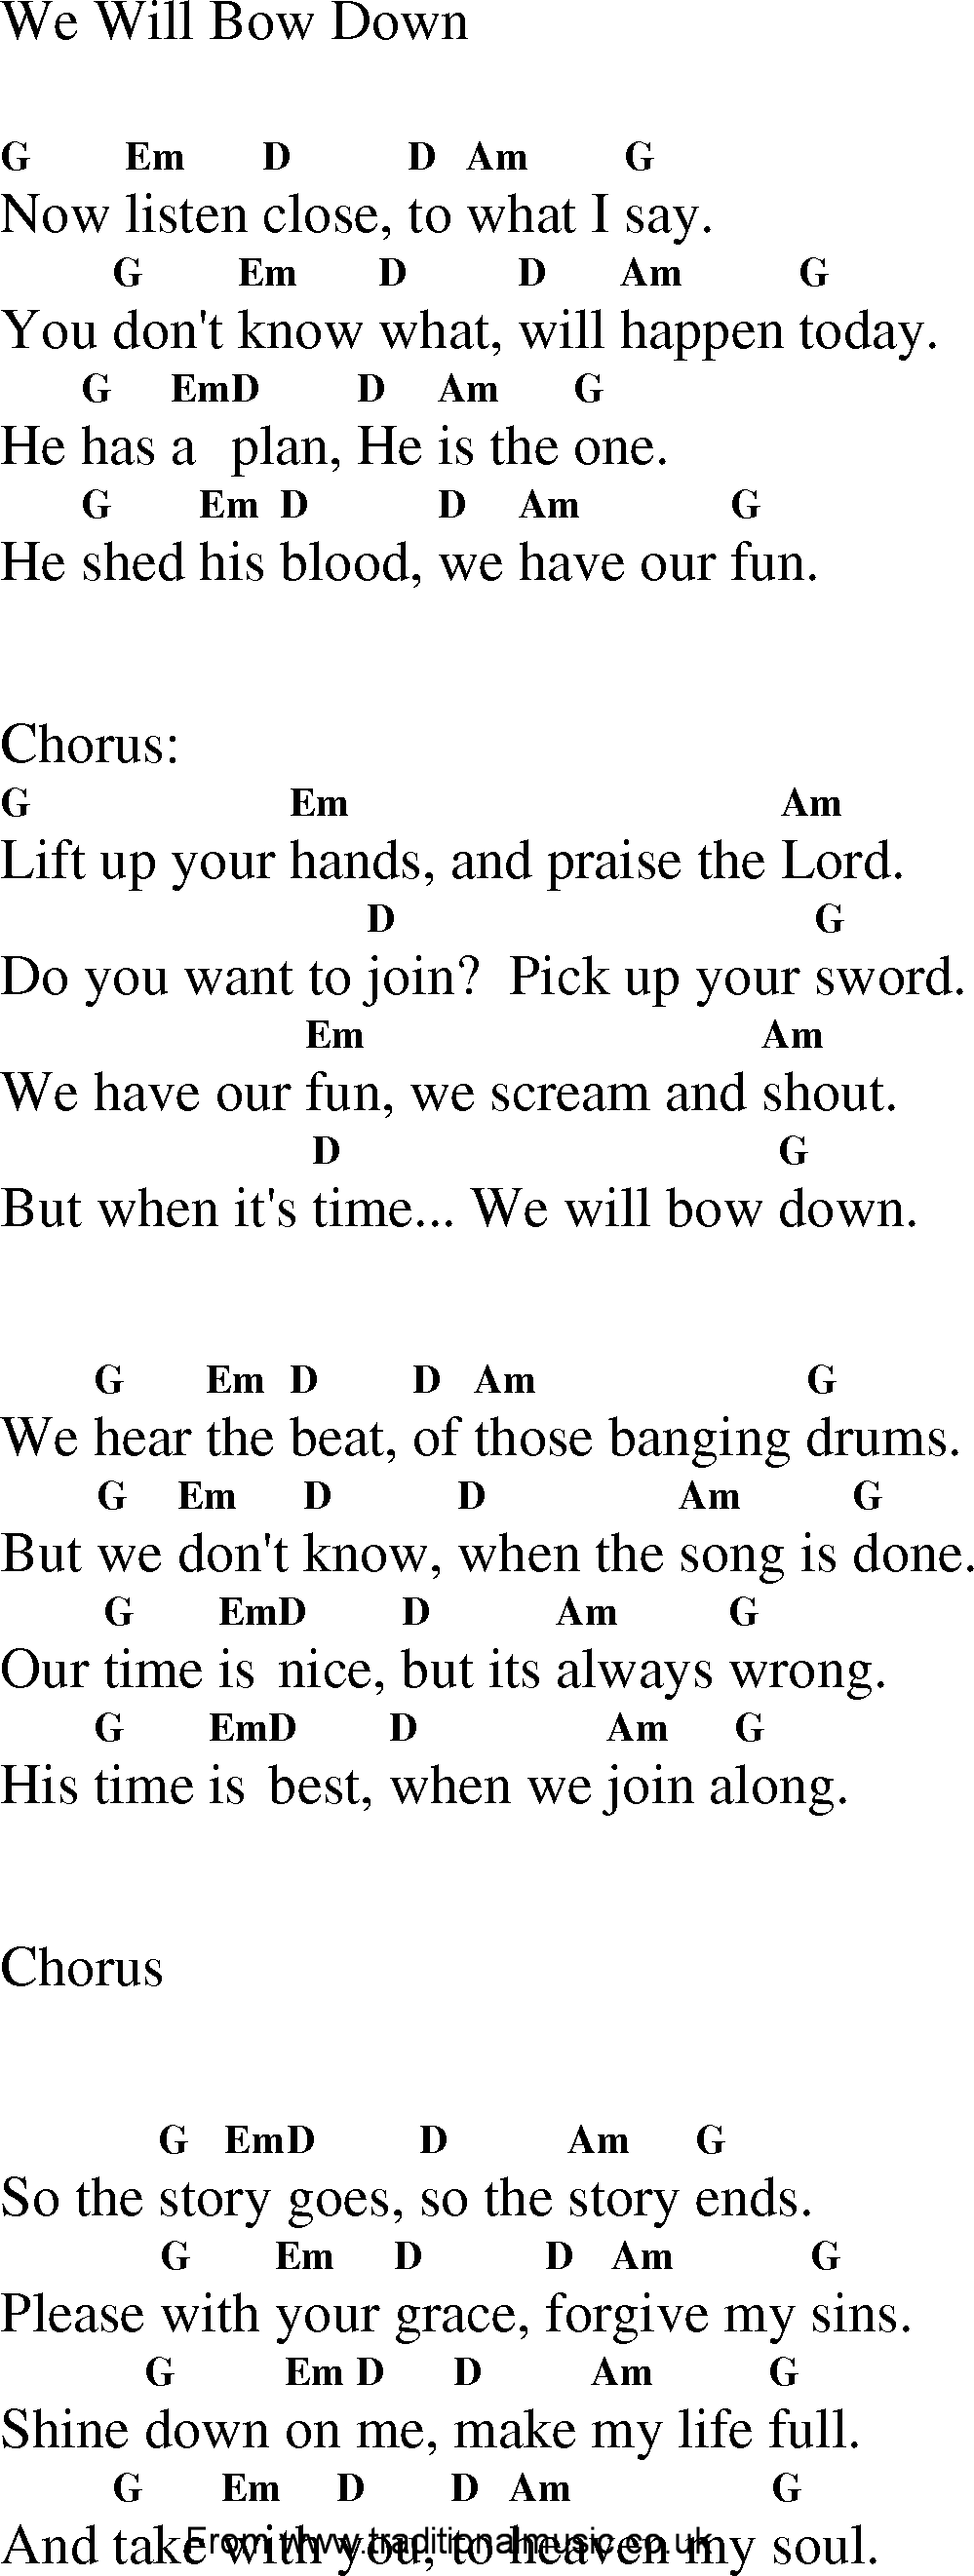 Gospel Song: we_will_bow_down, lyrics and chords.